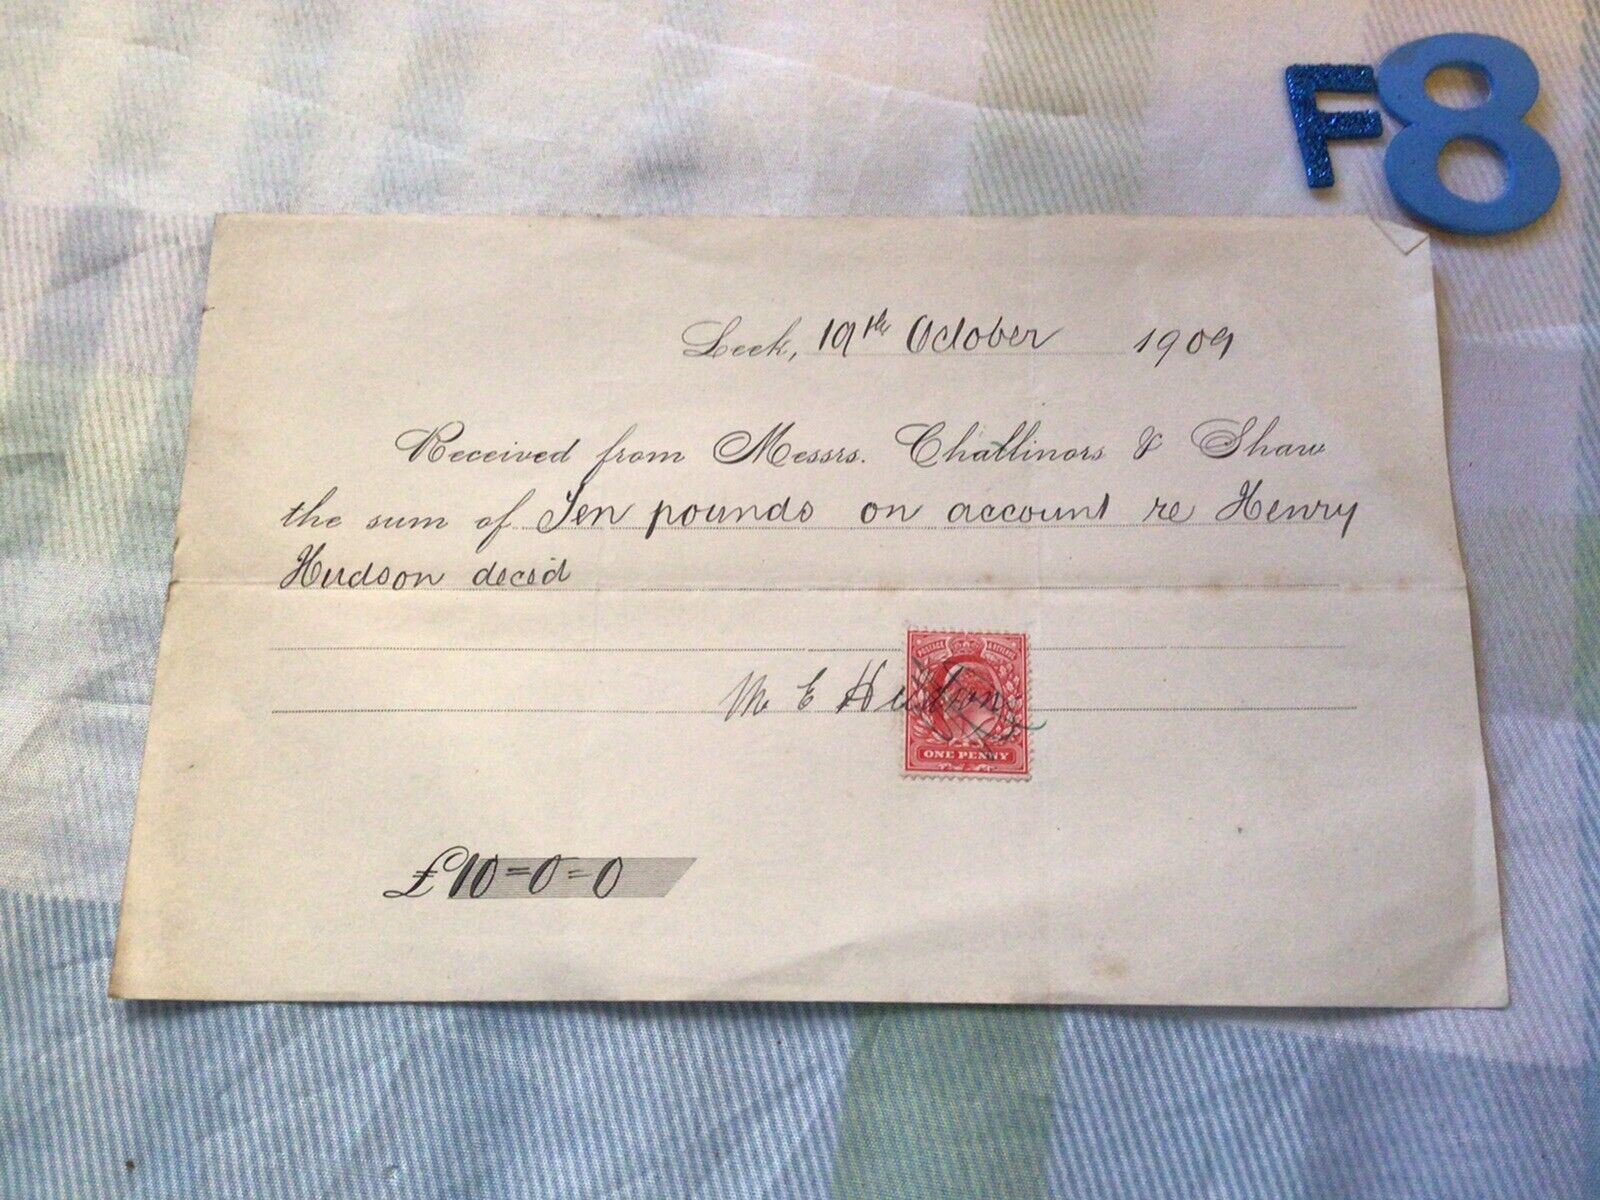 Rare 1909 Challinor & Shaw Co Solicitors Letter/Bill With Stamp Payment